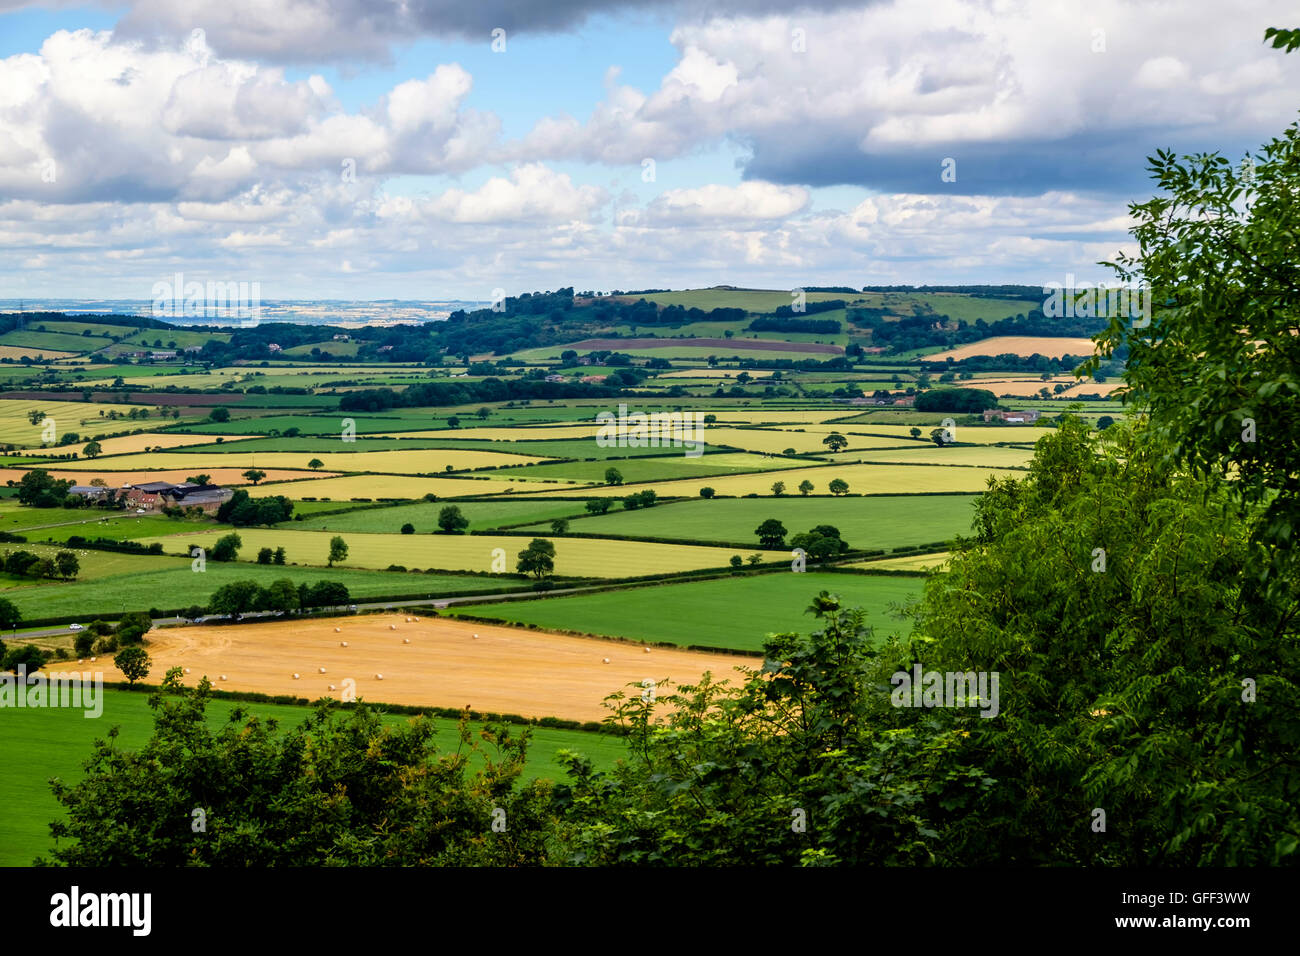 Patchwork quilt of green and gold fields in the North Yorkshire countryside Stock Photo